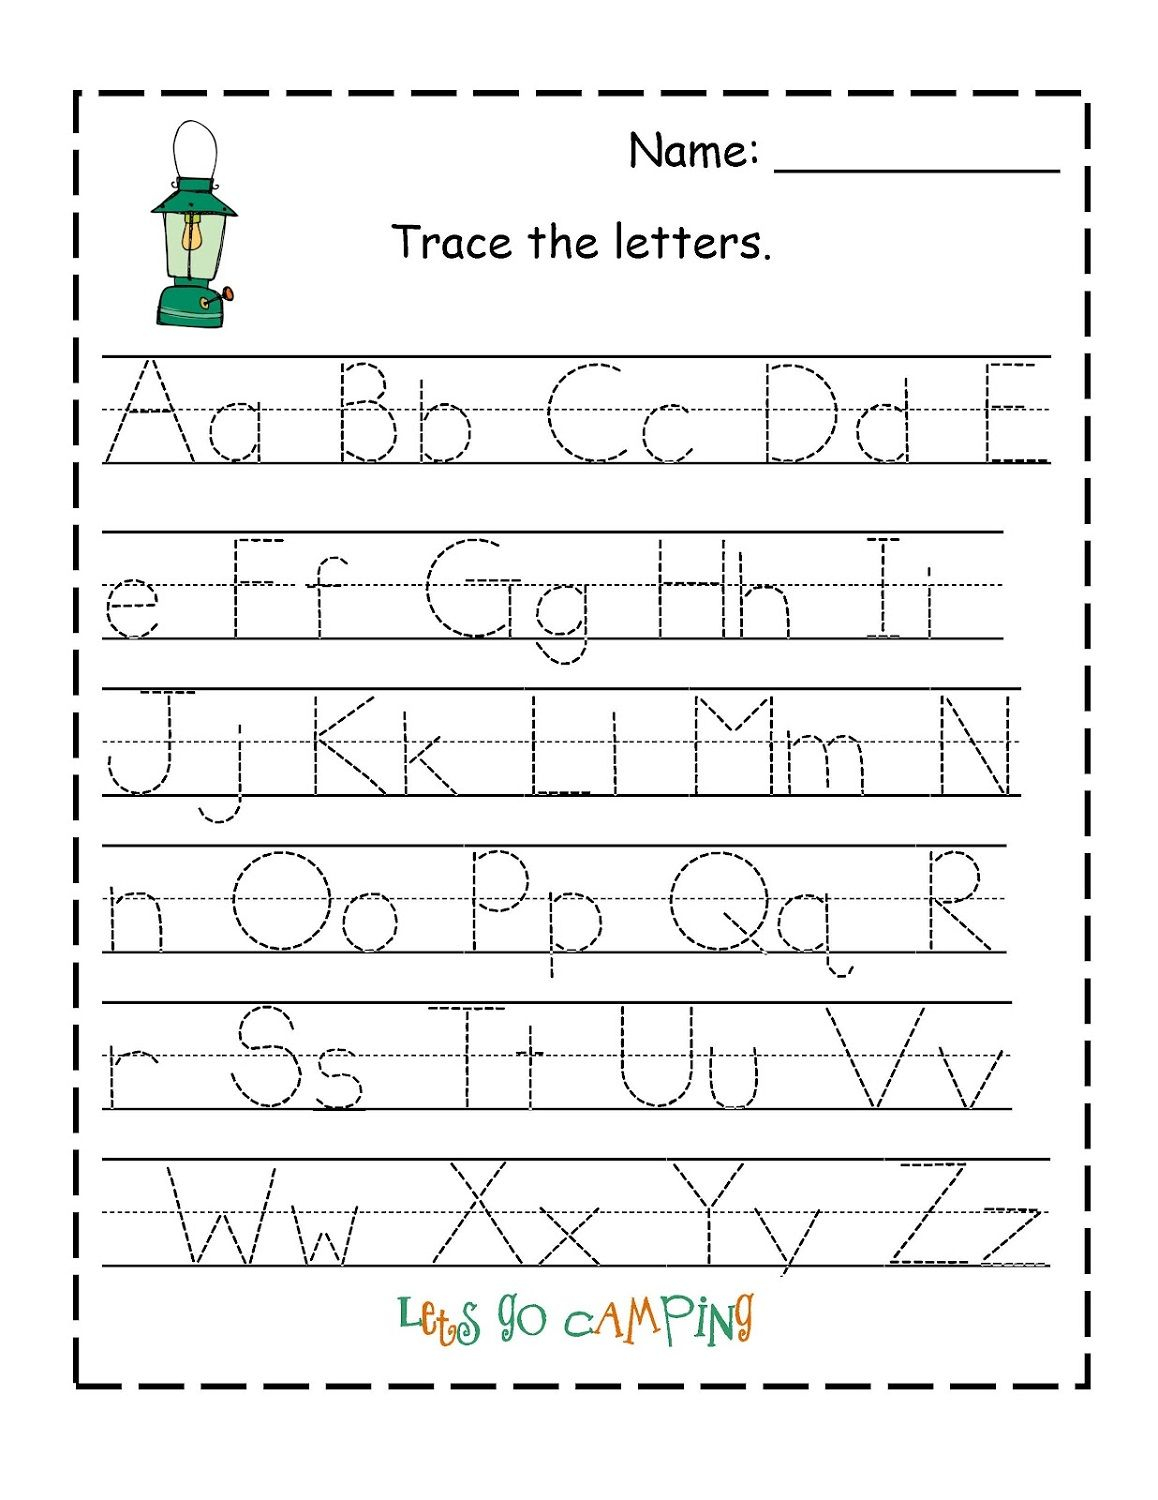 Traceable Alphabet Worksheets A-Z In 2020 | Alphabet